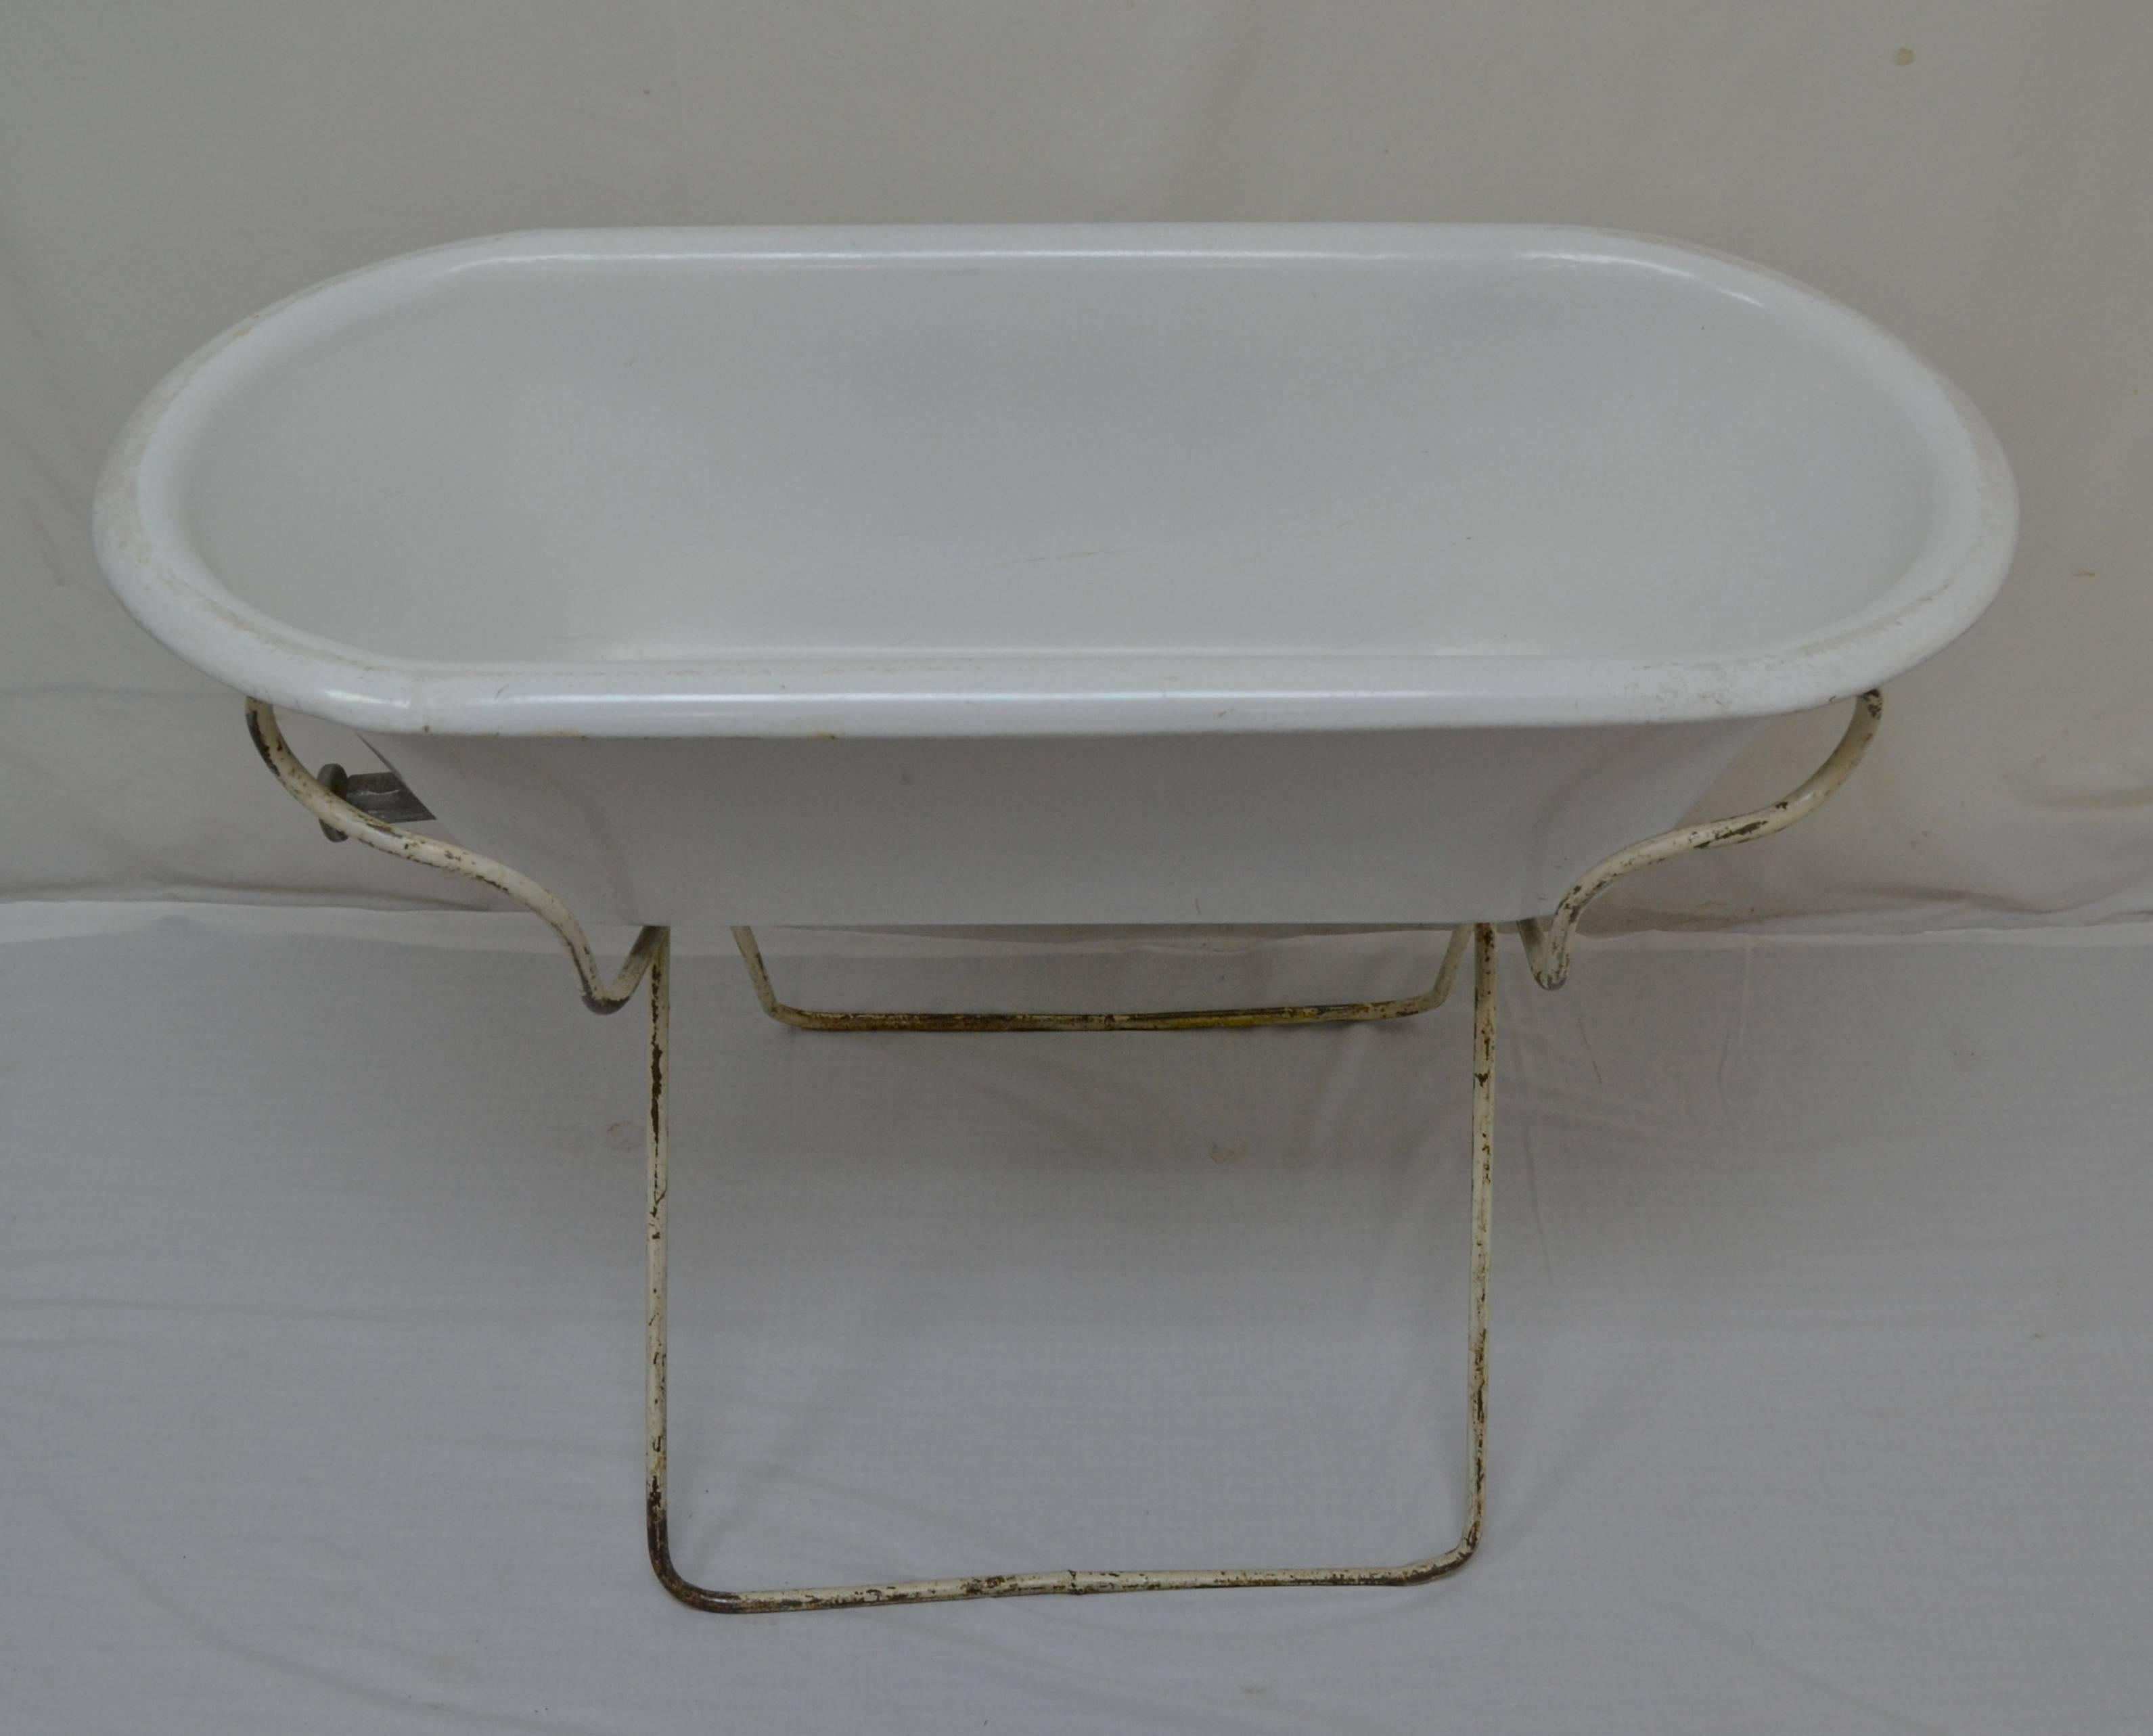 This is a charming porcelain enameled baby bath, deeper than usual by Kobanya of Hungary, mounted on an interesting original folding tubular steel stand. With summer approaching it would be great filled with bottles of beer or wine on ice, or